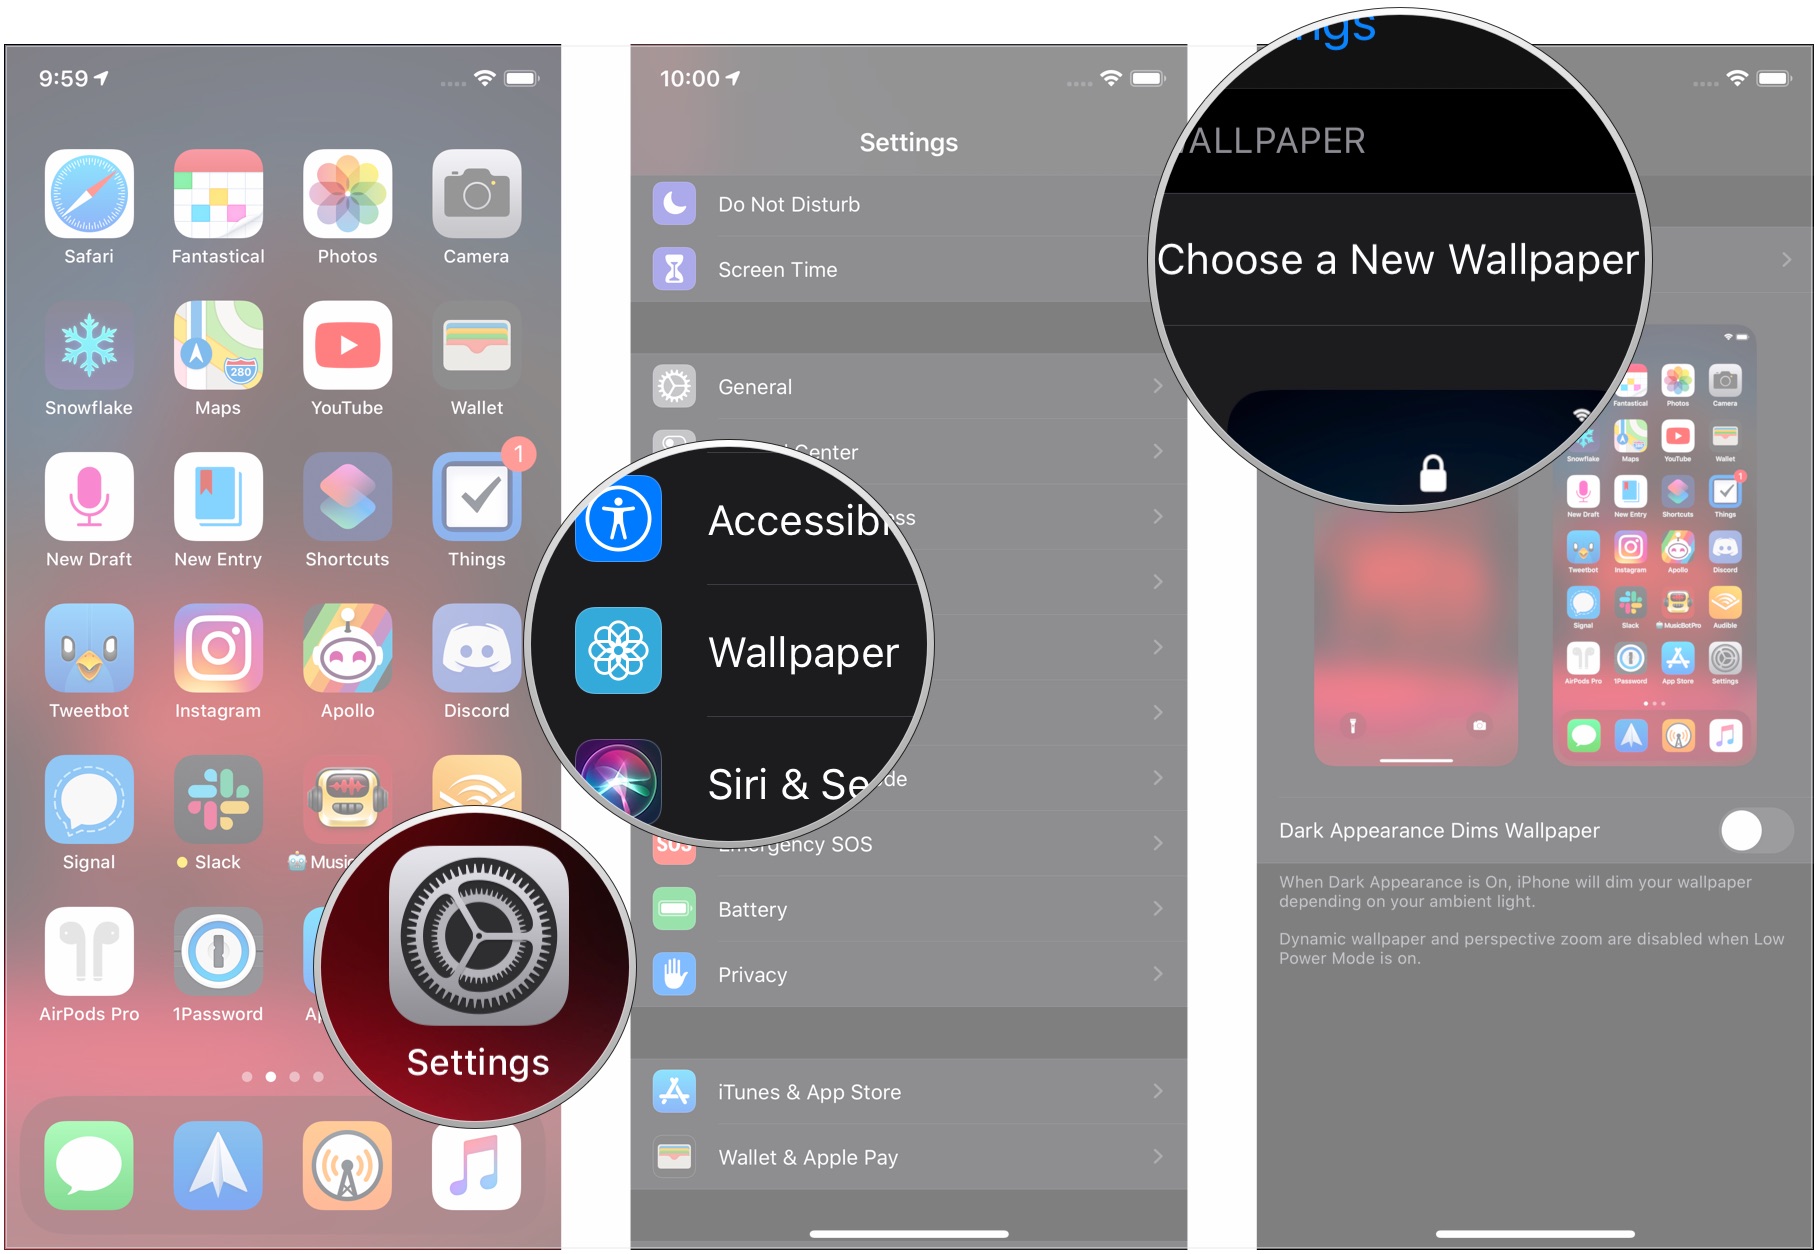 How to change the wallpaper on your Lock screen: Open Settings, tap Wallpaper